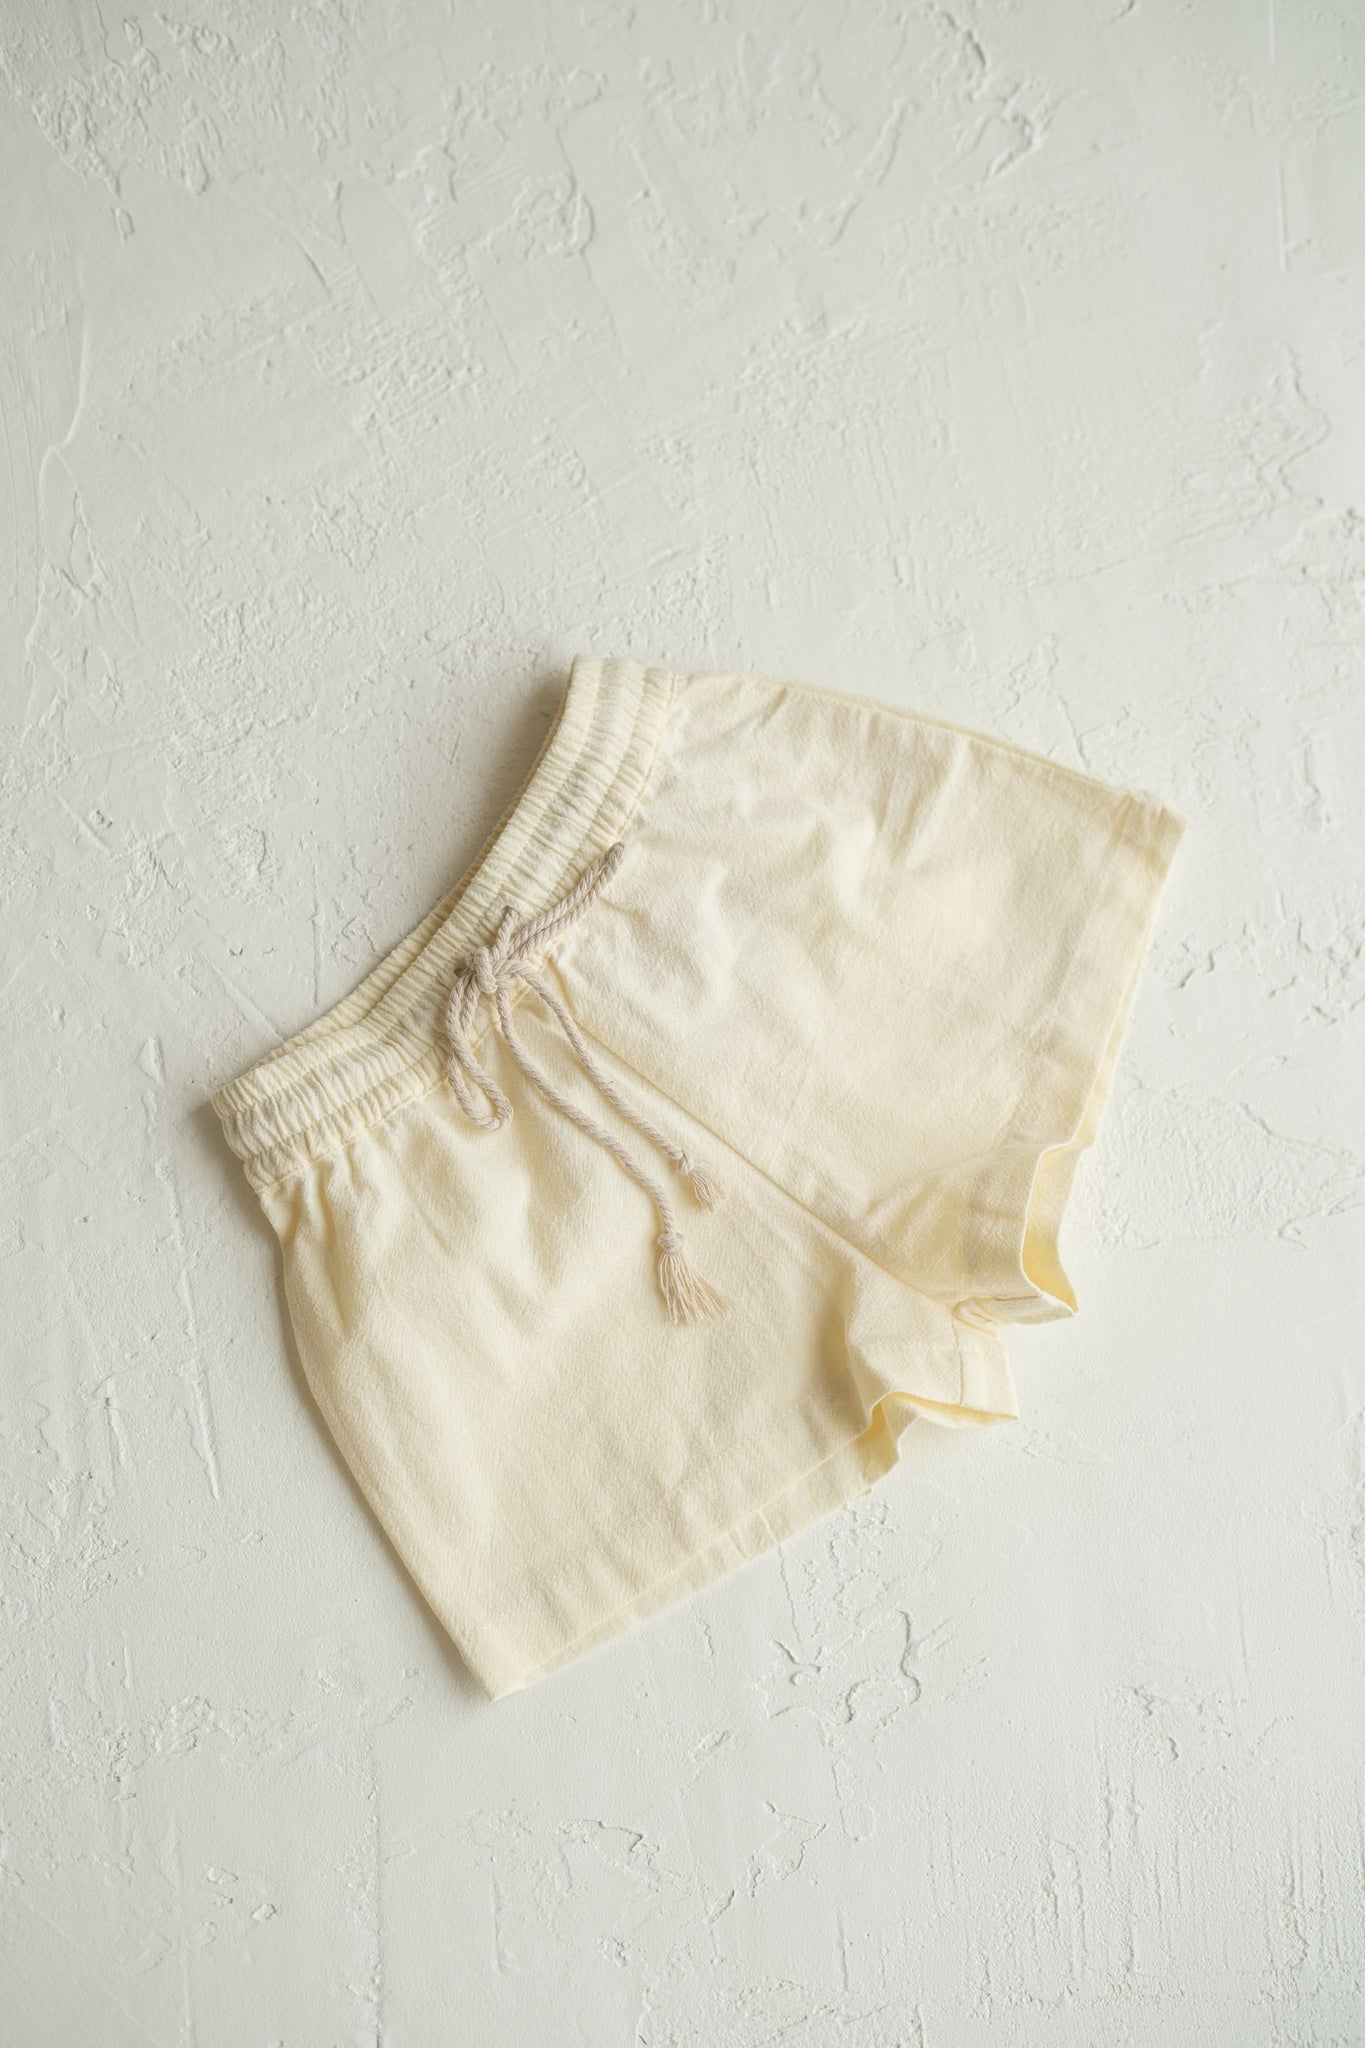 Bowie shorts - coconut